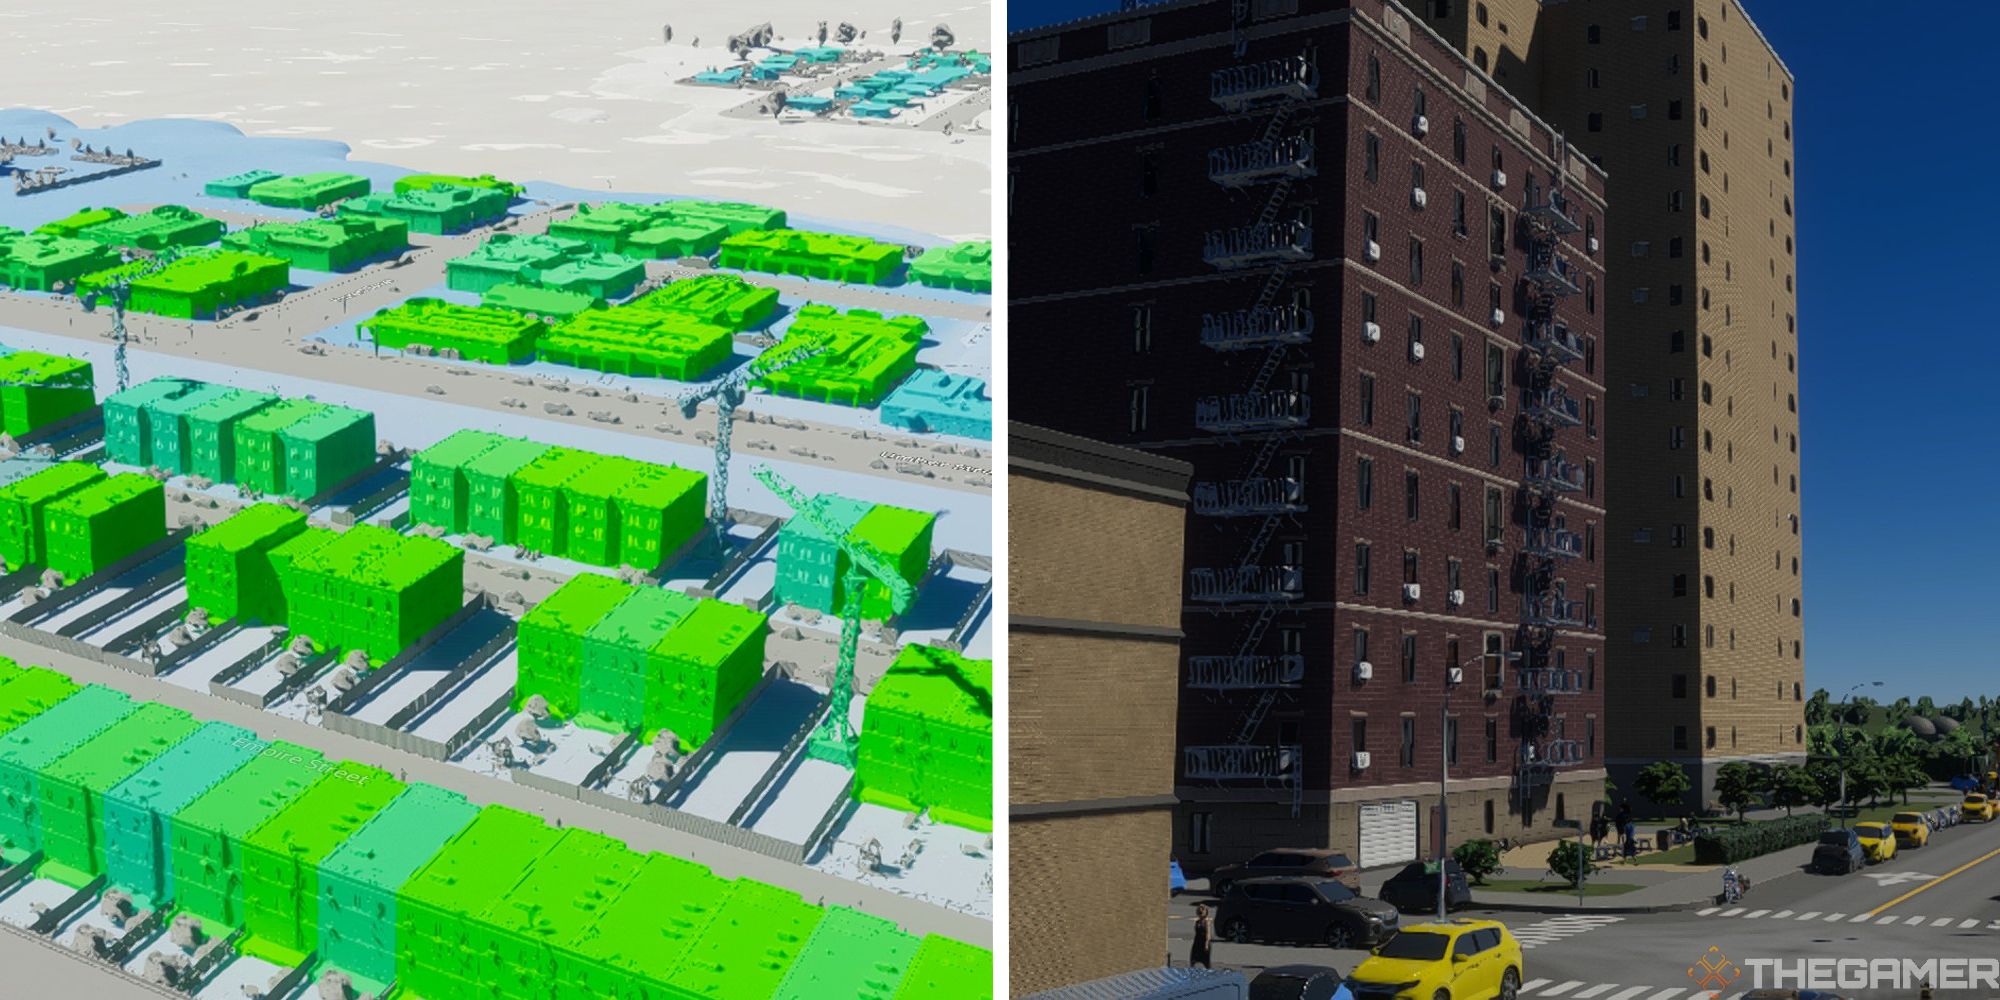 cities skylines 2 high rent problem featured image showing land value filter next to image of low rent housing